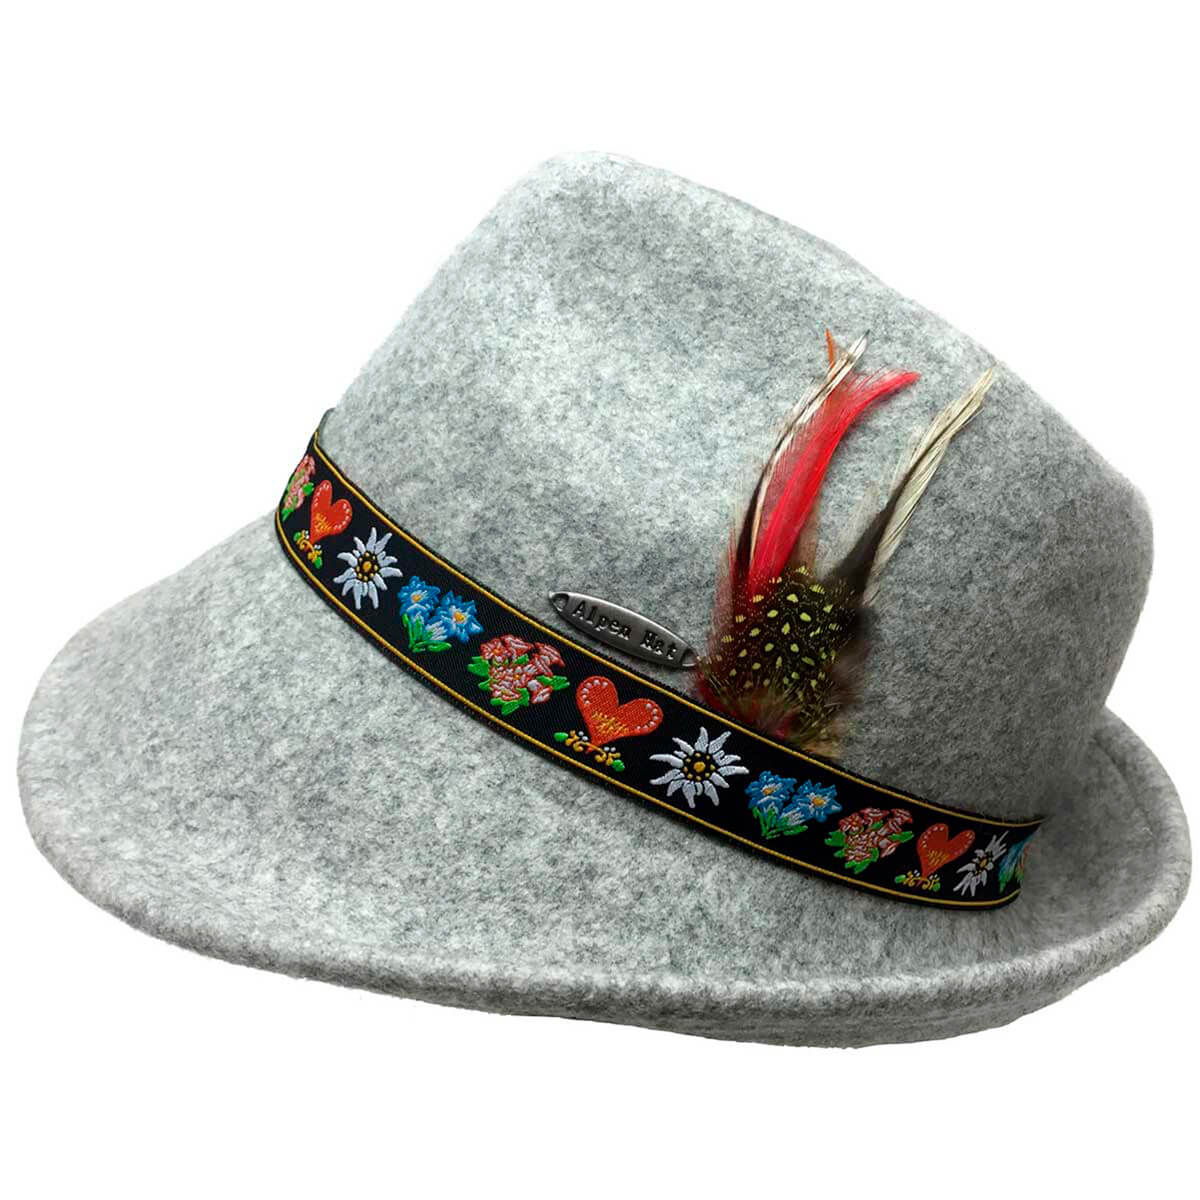 Stylish Tyrolean Alps Wool Hat with alpine flowers embroidery ...